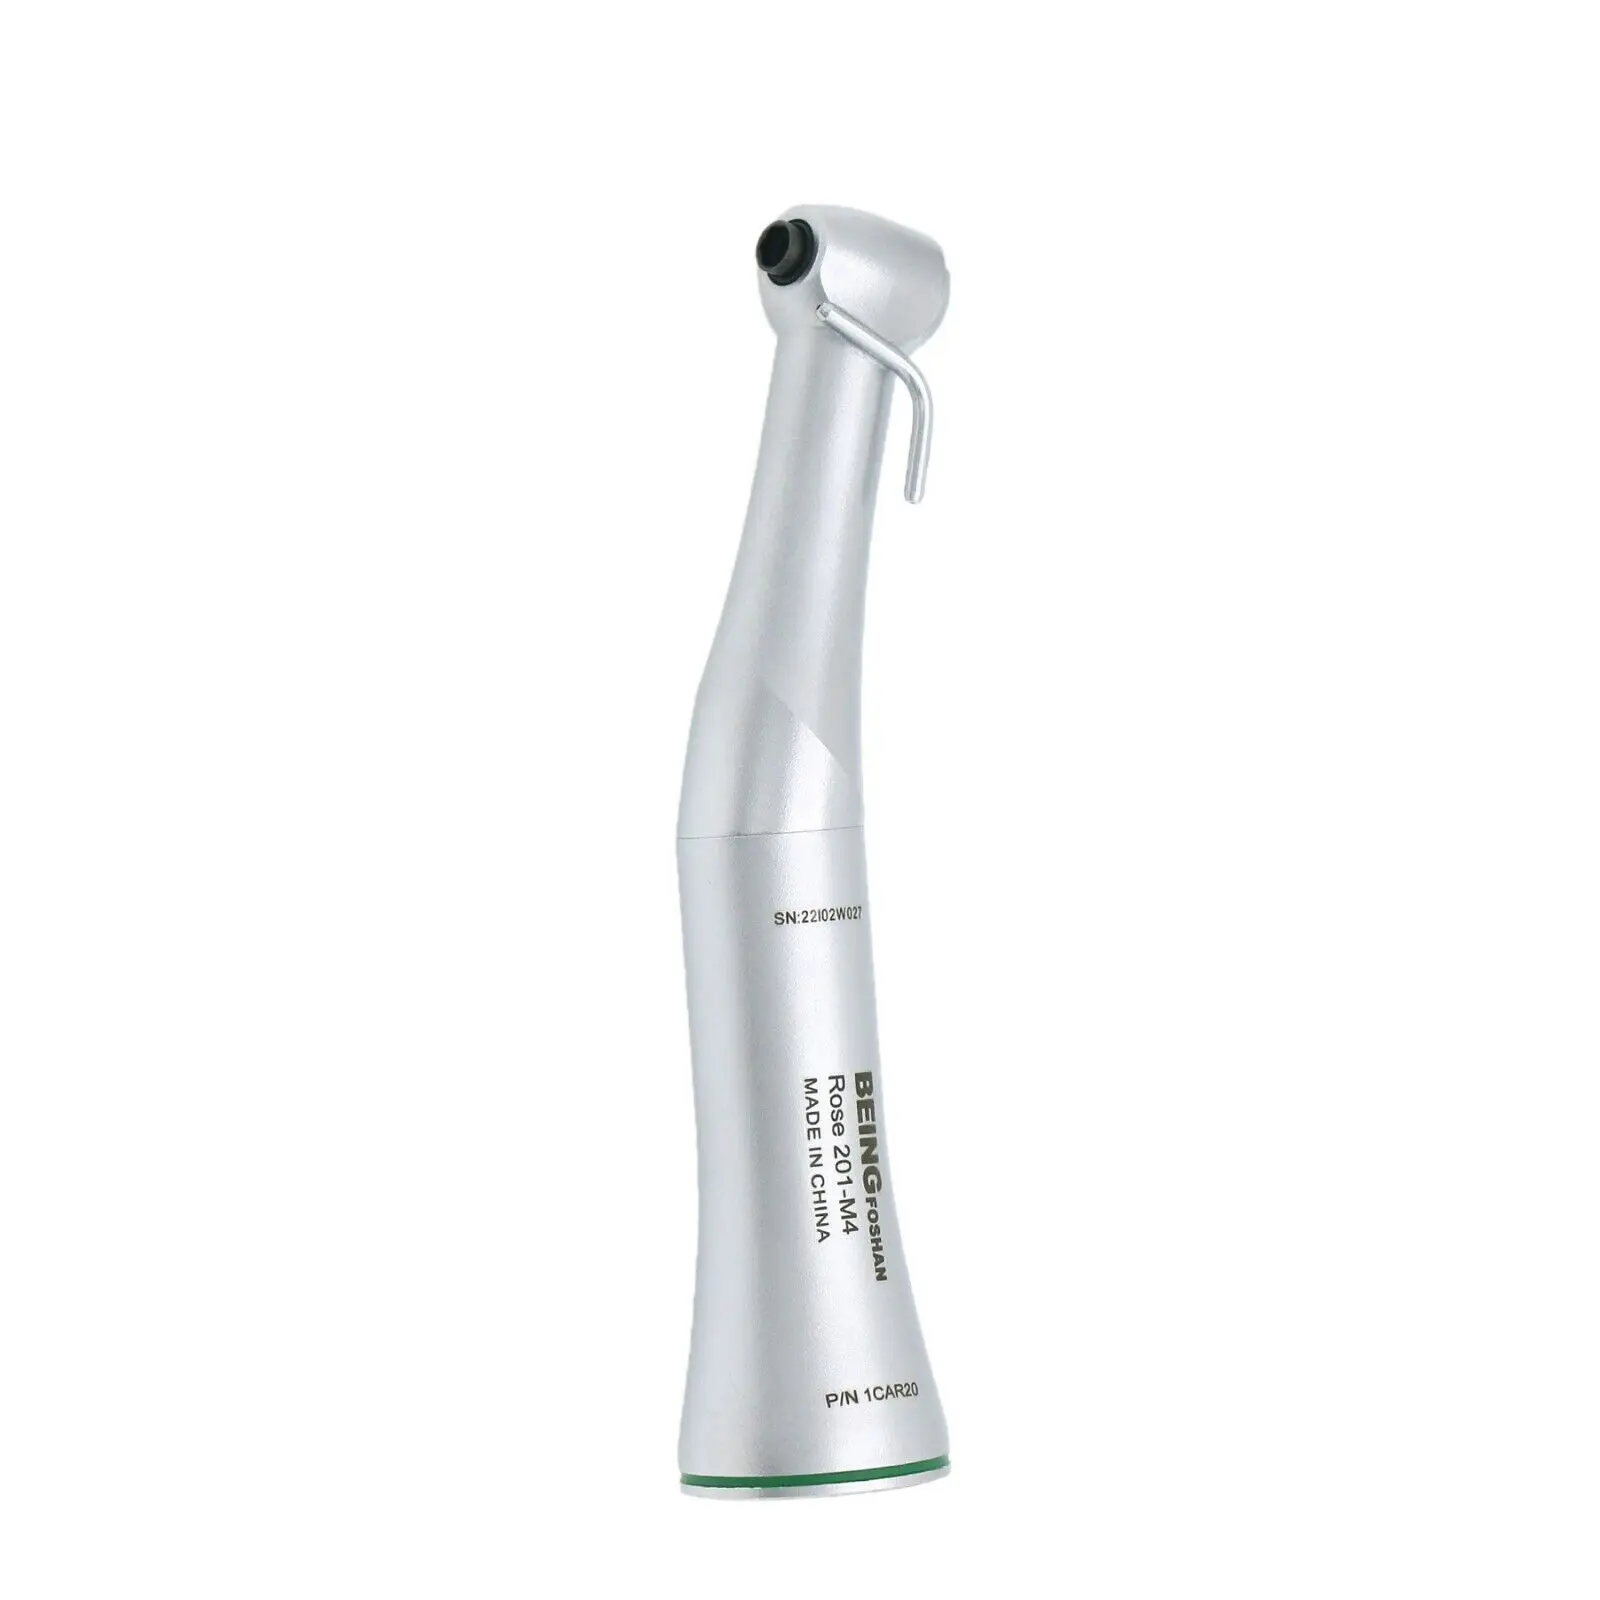 Being Dental 20:1 Implant Surgery Low Speed Handpiece Contra Angle Handpeice 201CAR20